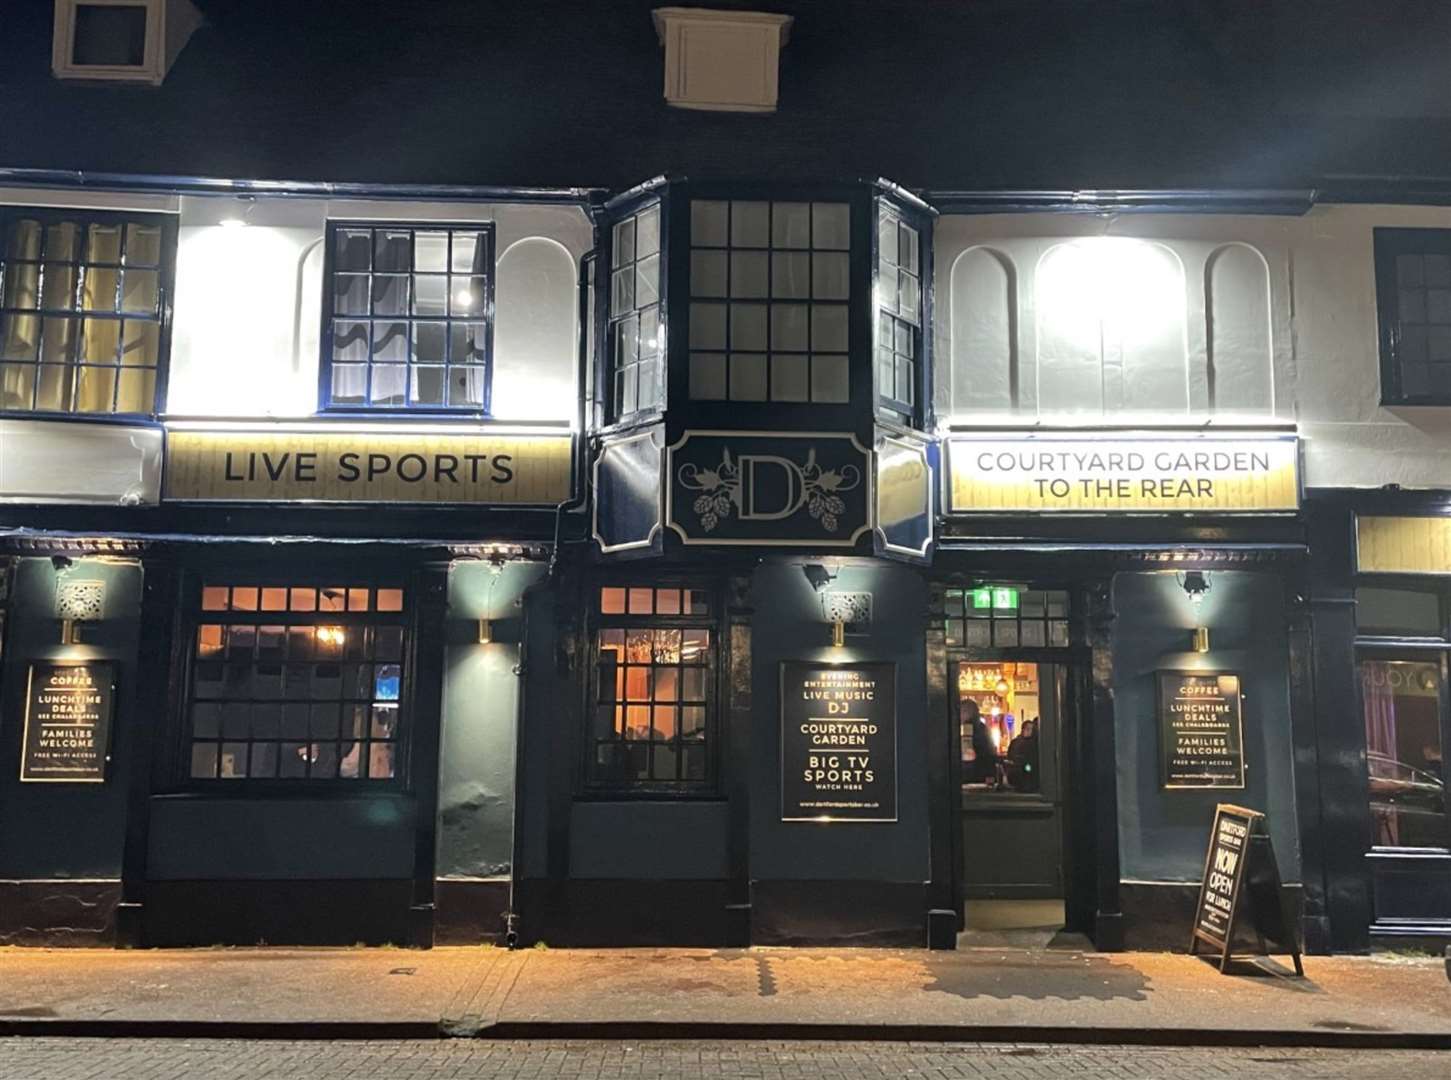 The Dartford Sports Bar has opened in place of the former Industry nightclub in Spital Street following a £400,000 refurbishment